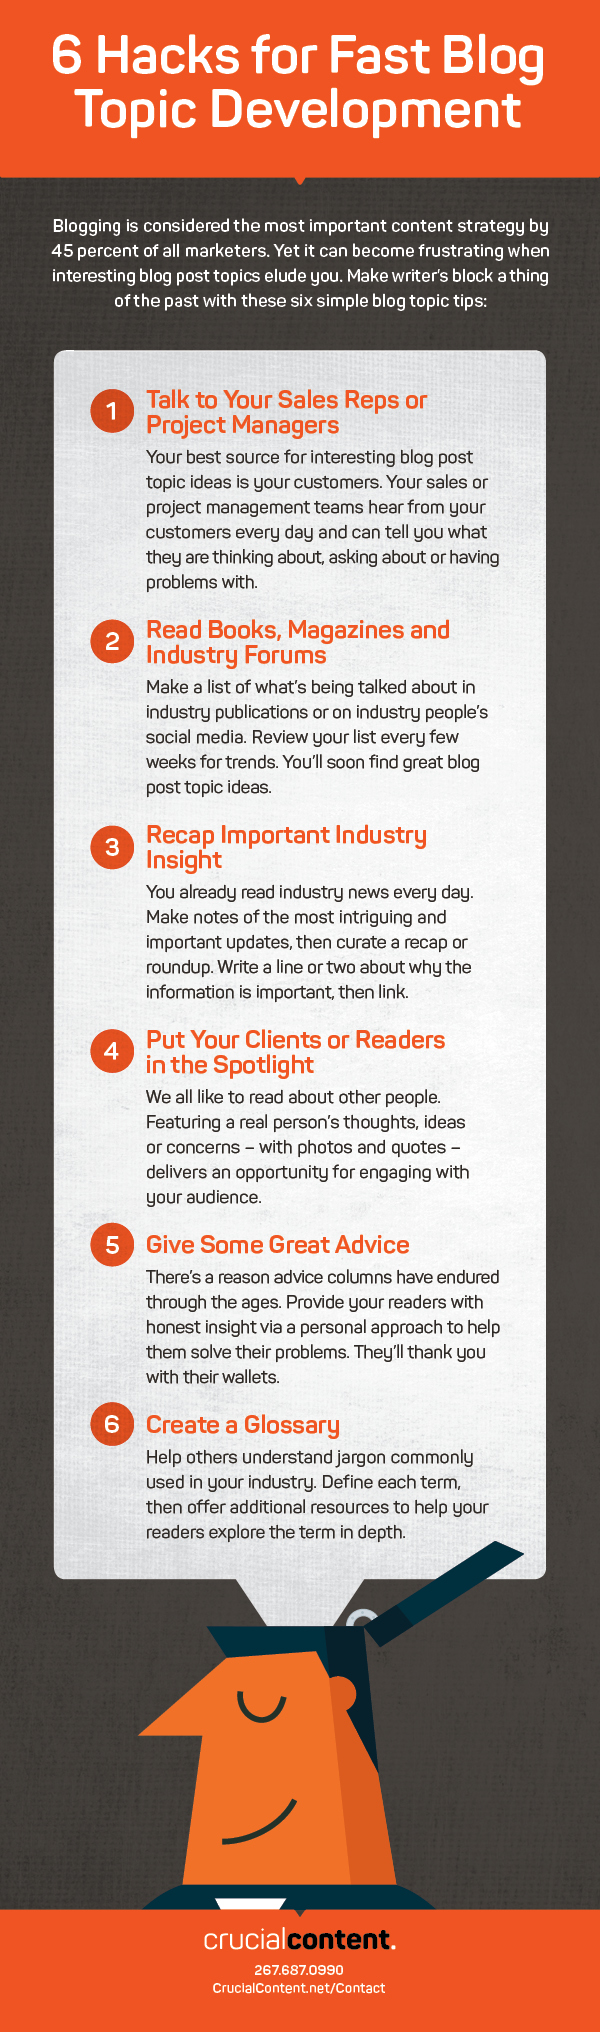 Infographic showing fast ways to create interesting blog topics